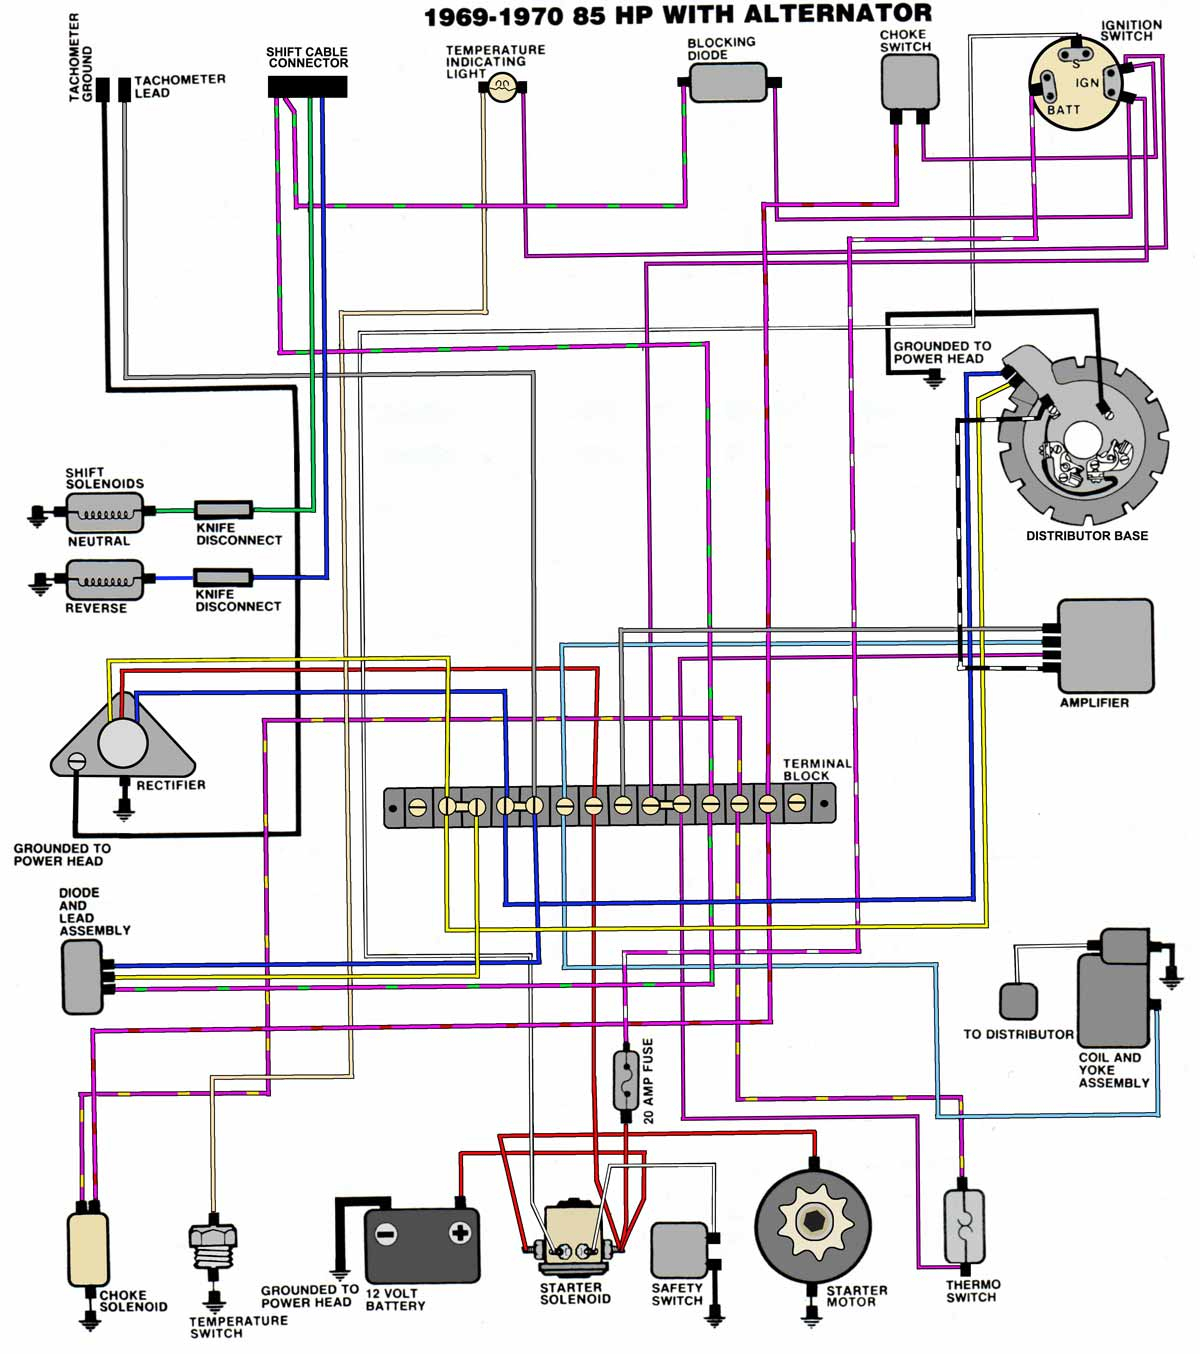 115 Hp Evinrude Wiring Harness Diagram | Wiring Diagram - Evinrude Wiring Harness Diagram